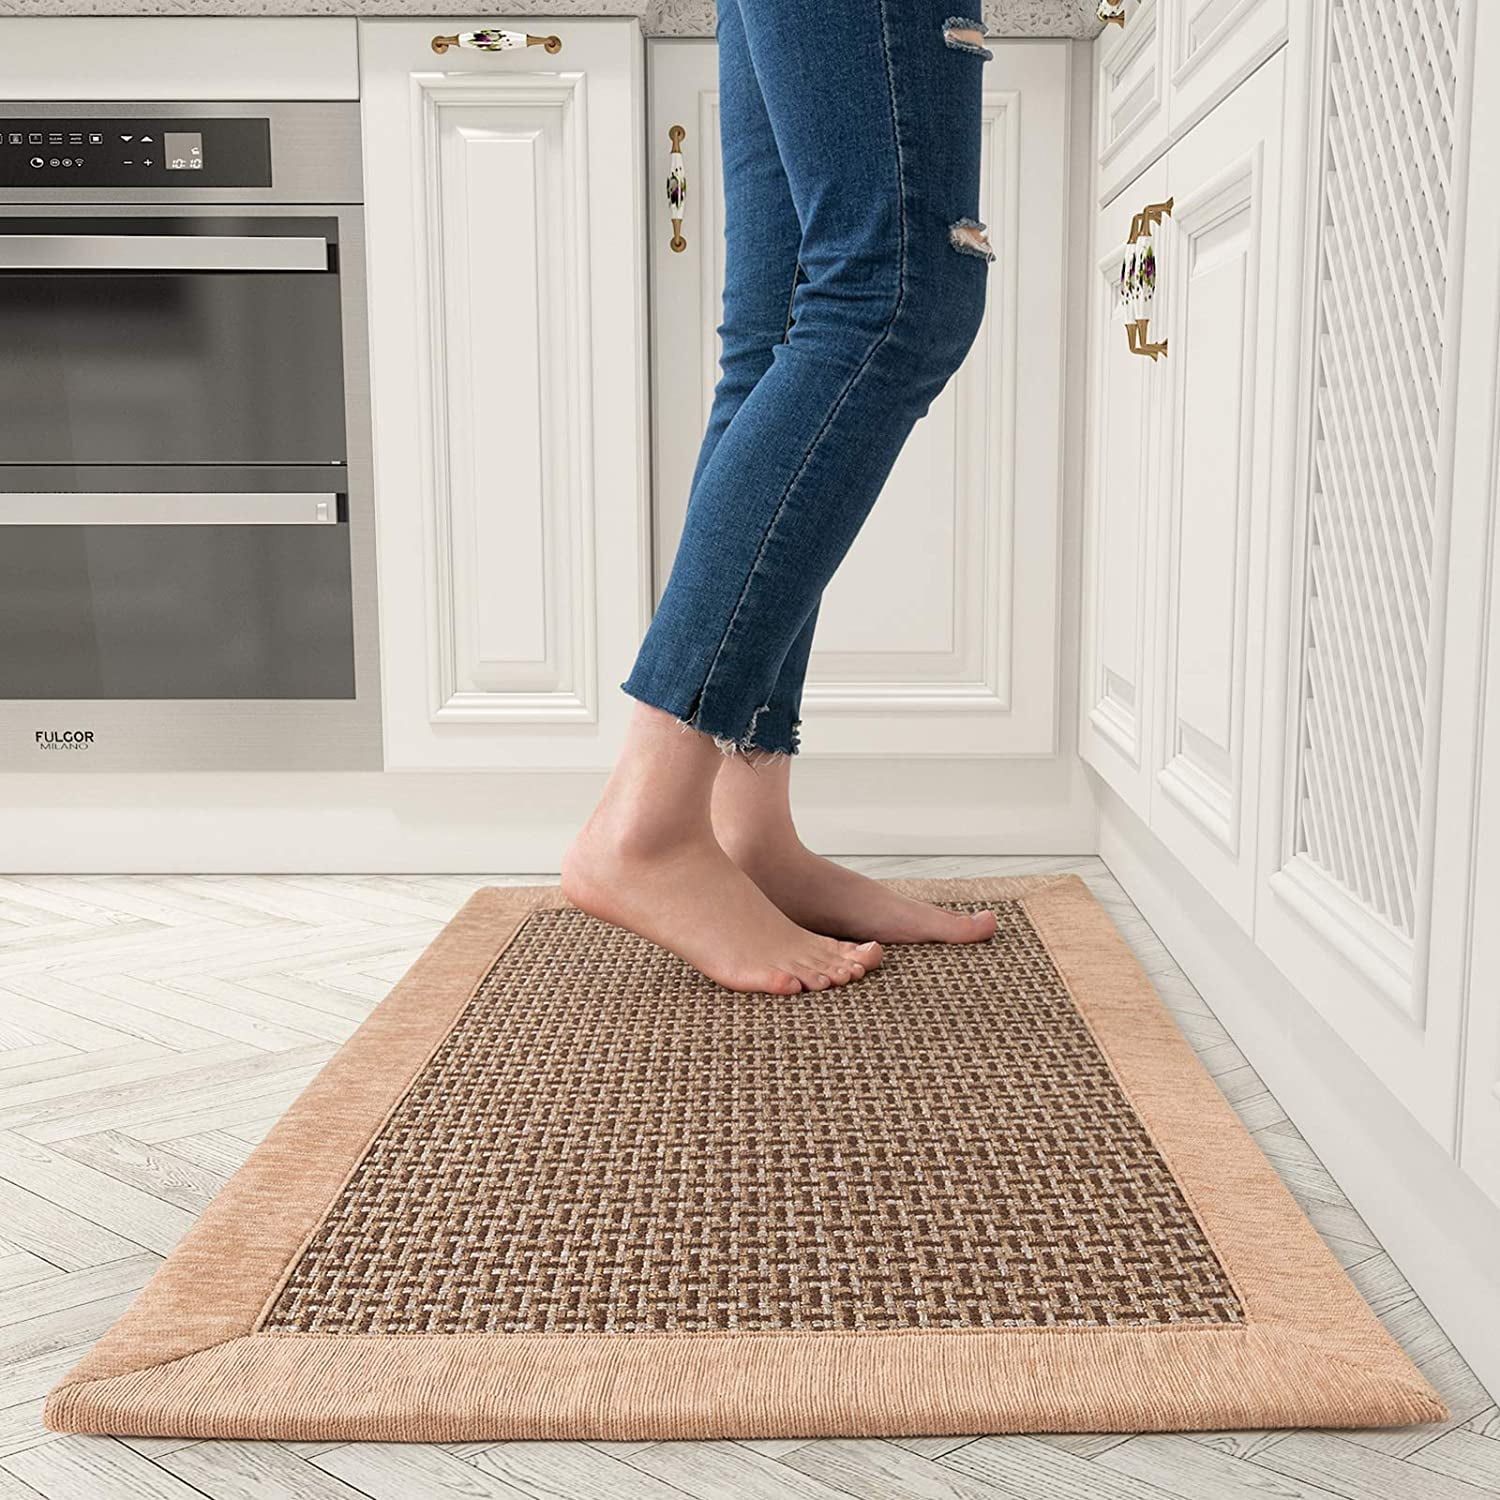 Soft Kitchen Rugs [2 PCS] for in Front of Sink Super Absorbent